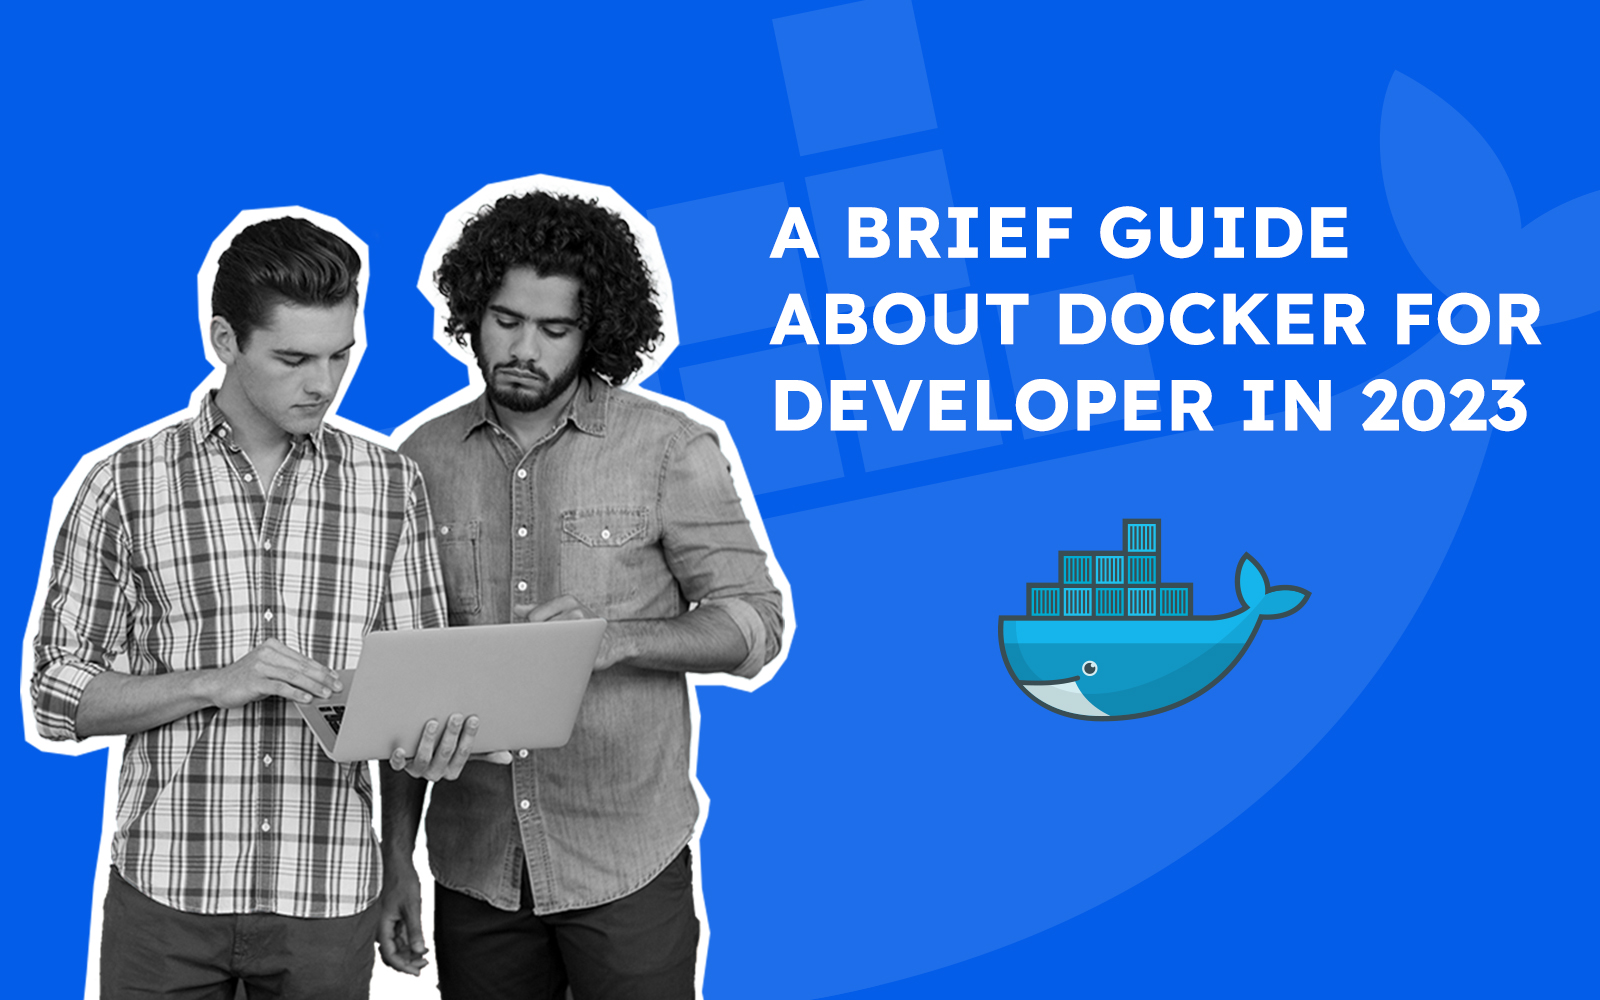 A Brief Guide about Docker for Developer in 2023